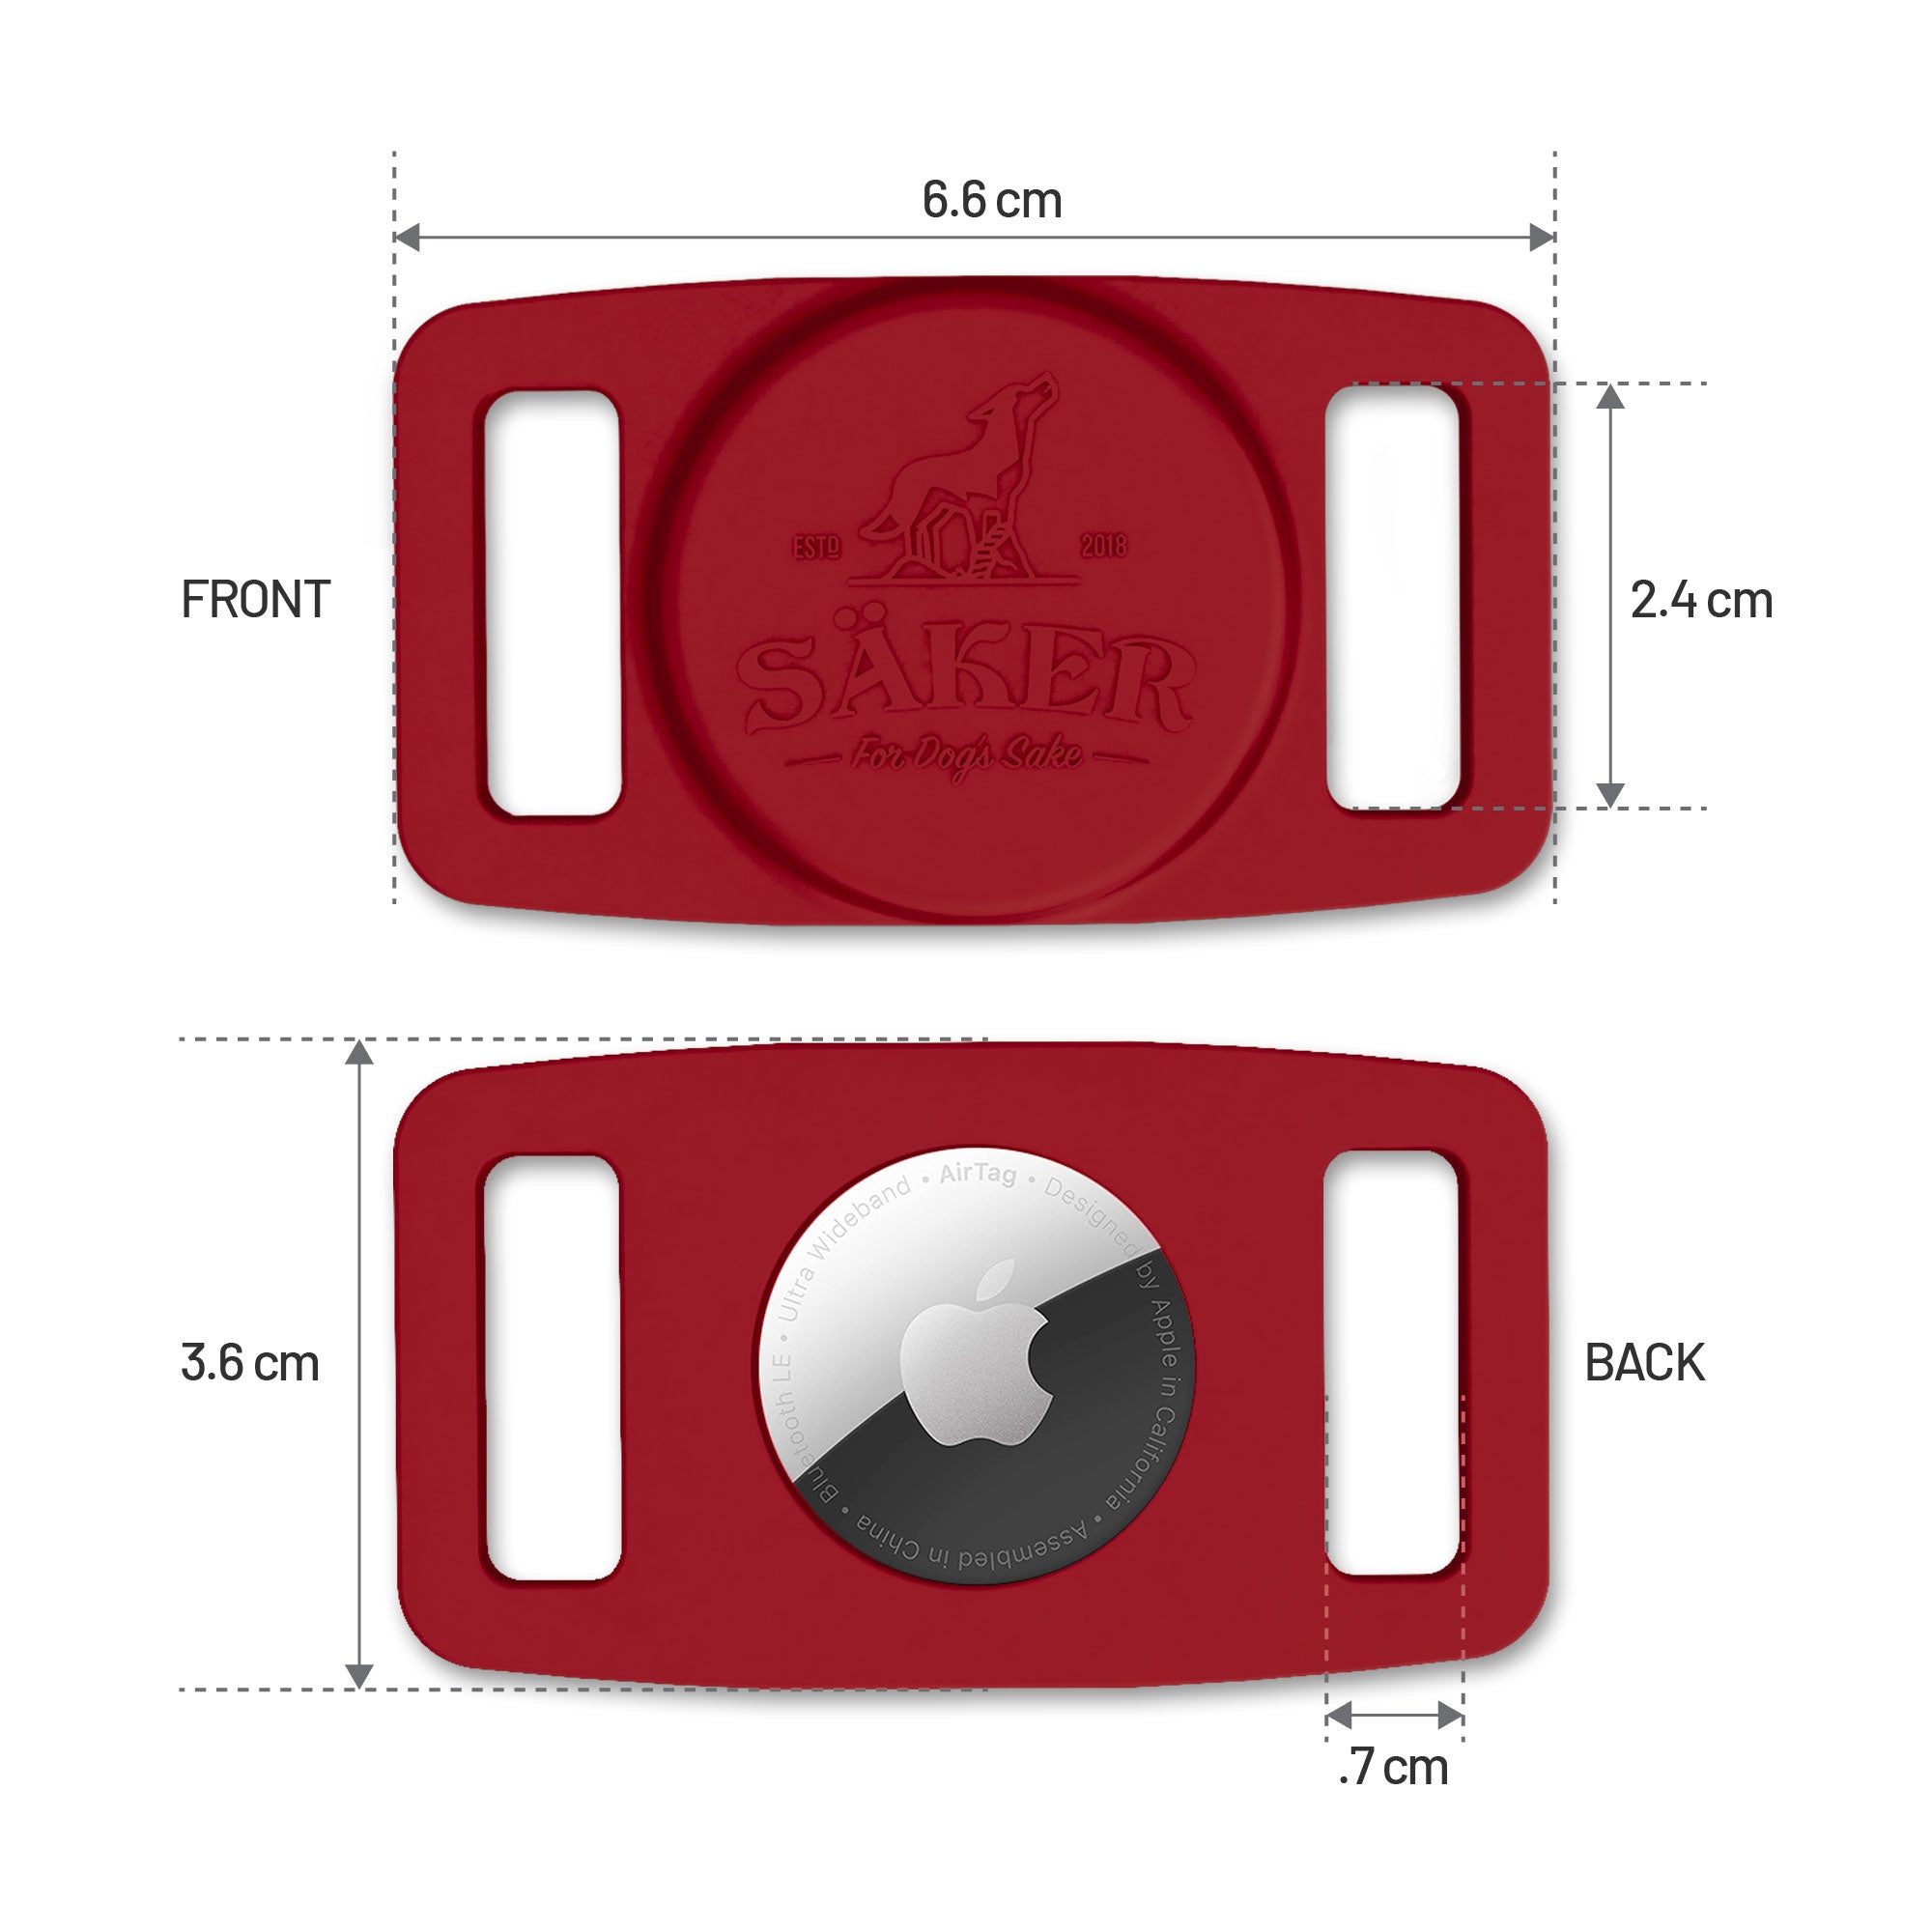 Back view and front view of the Airtag Holder with it's measurements.